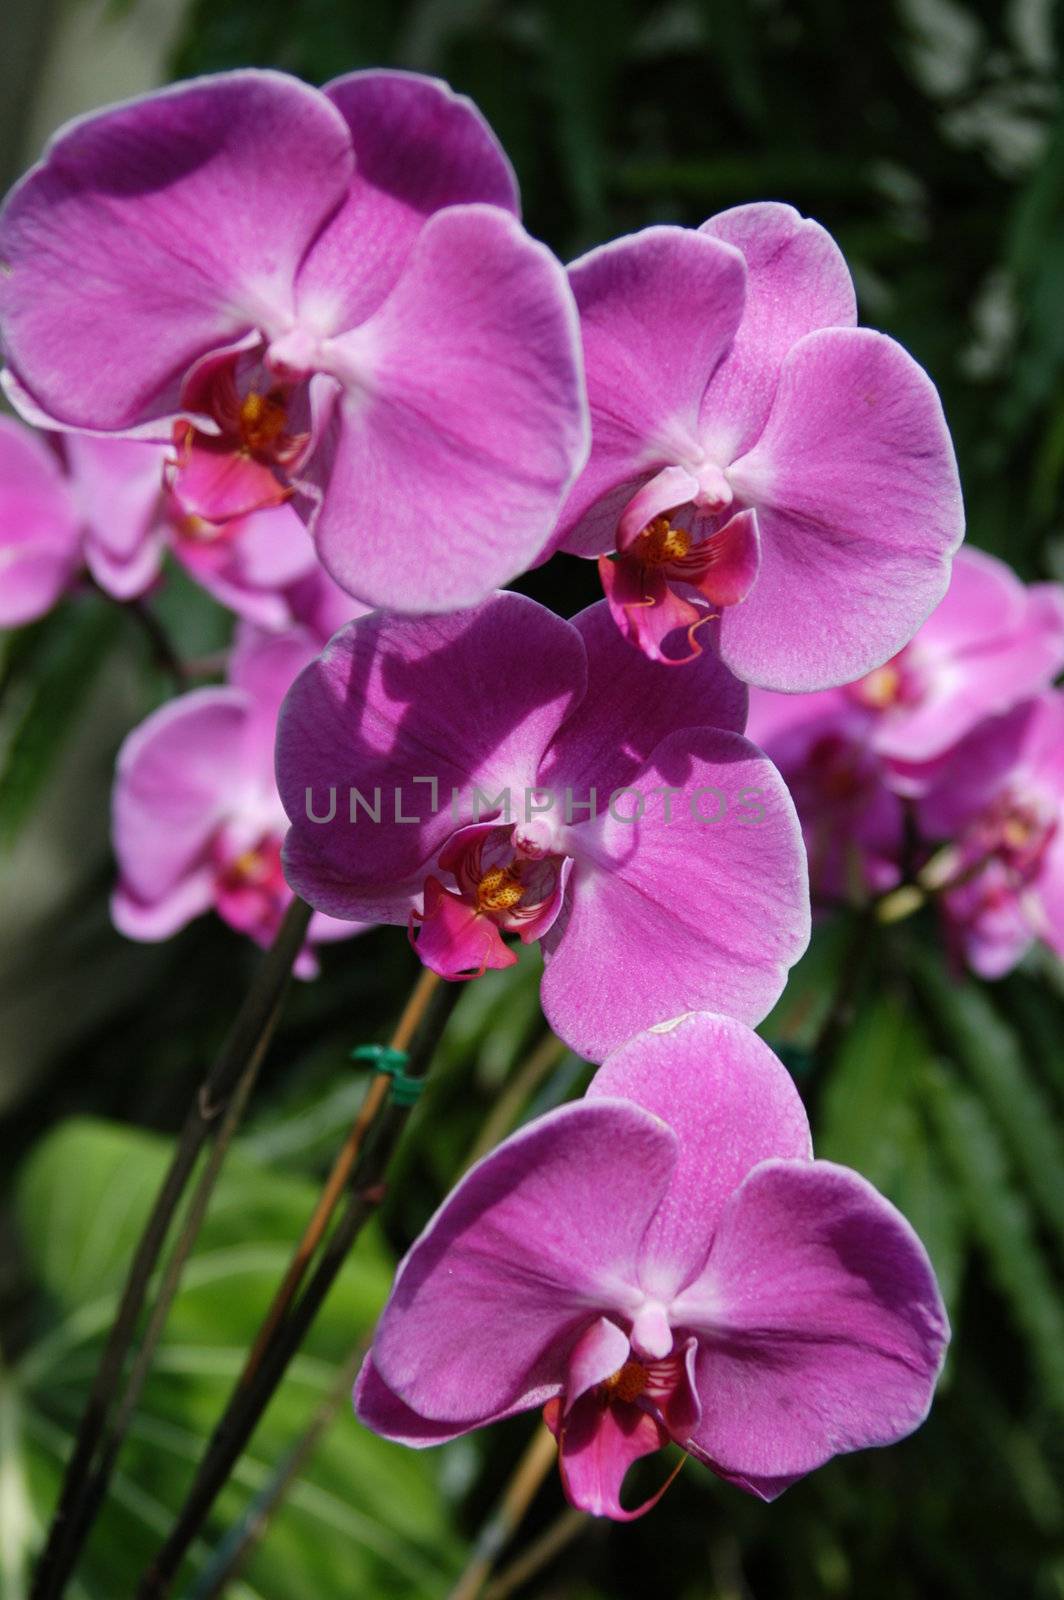 Purple Orchids up close by northwoodsphoto